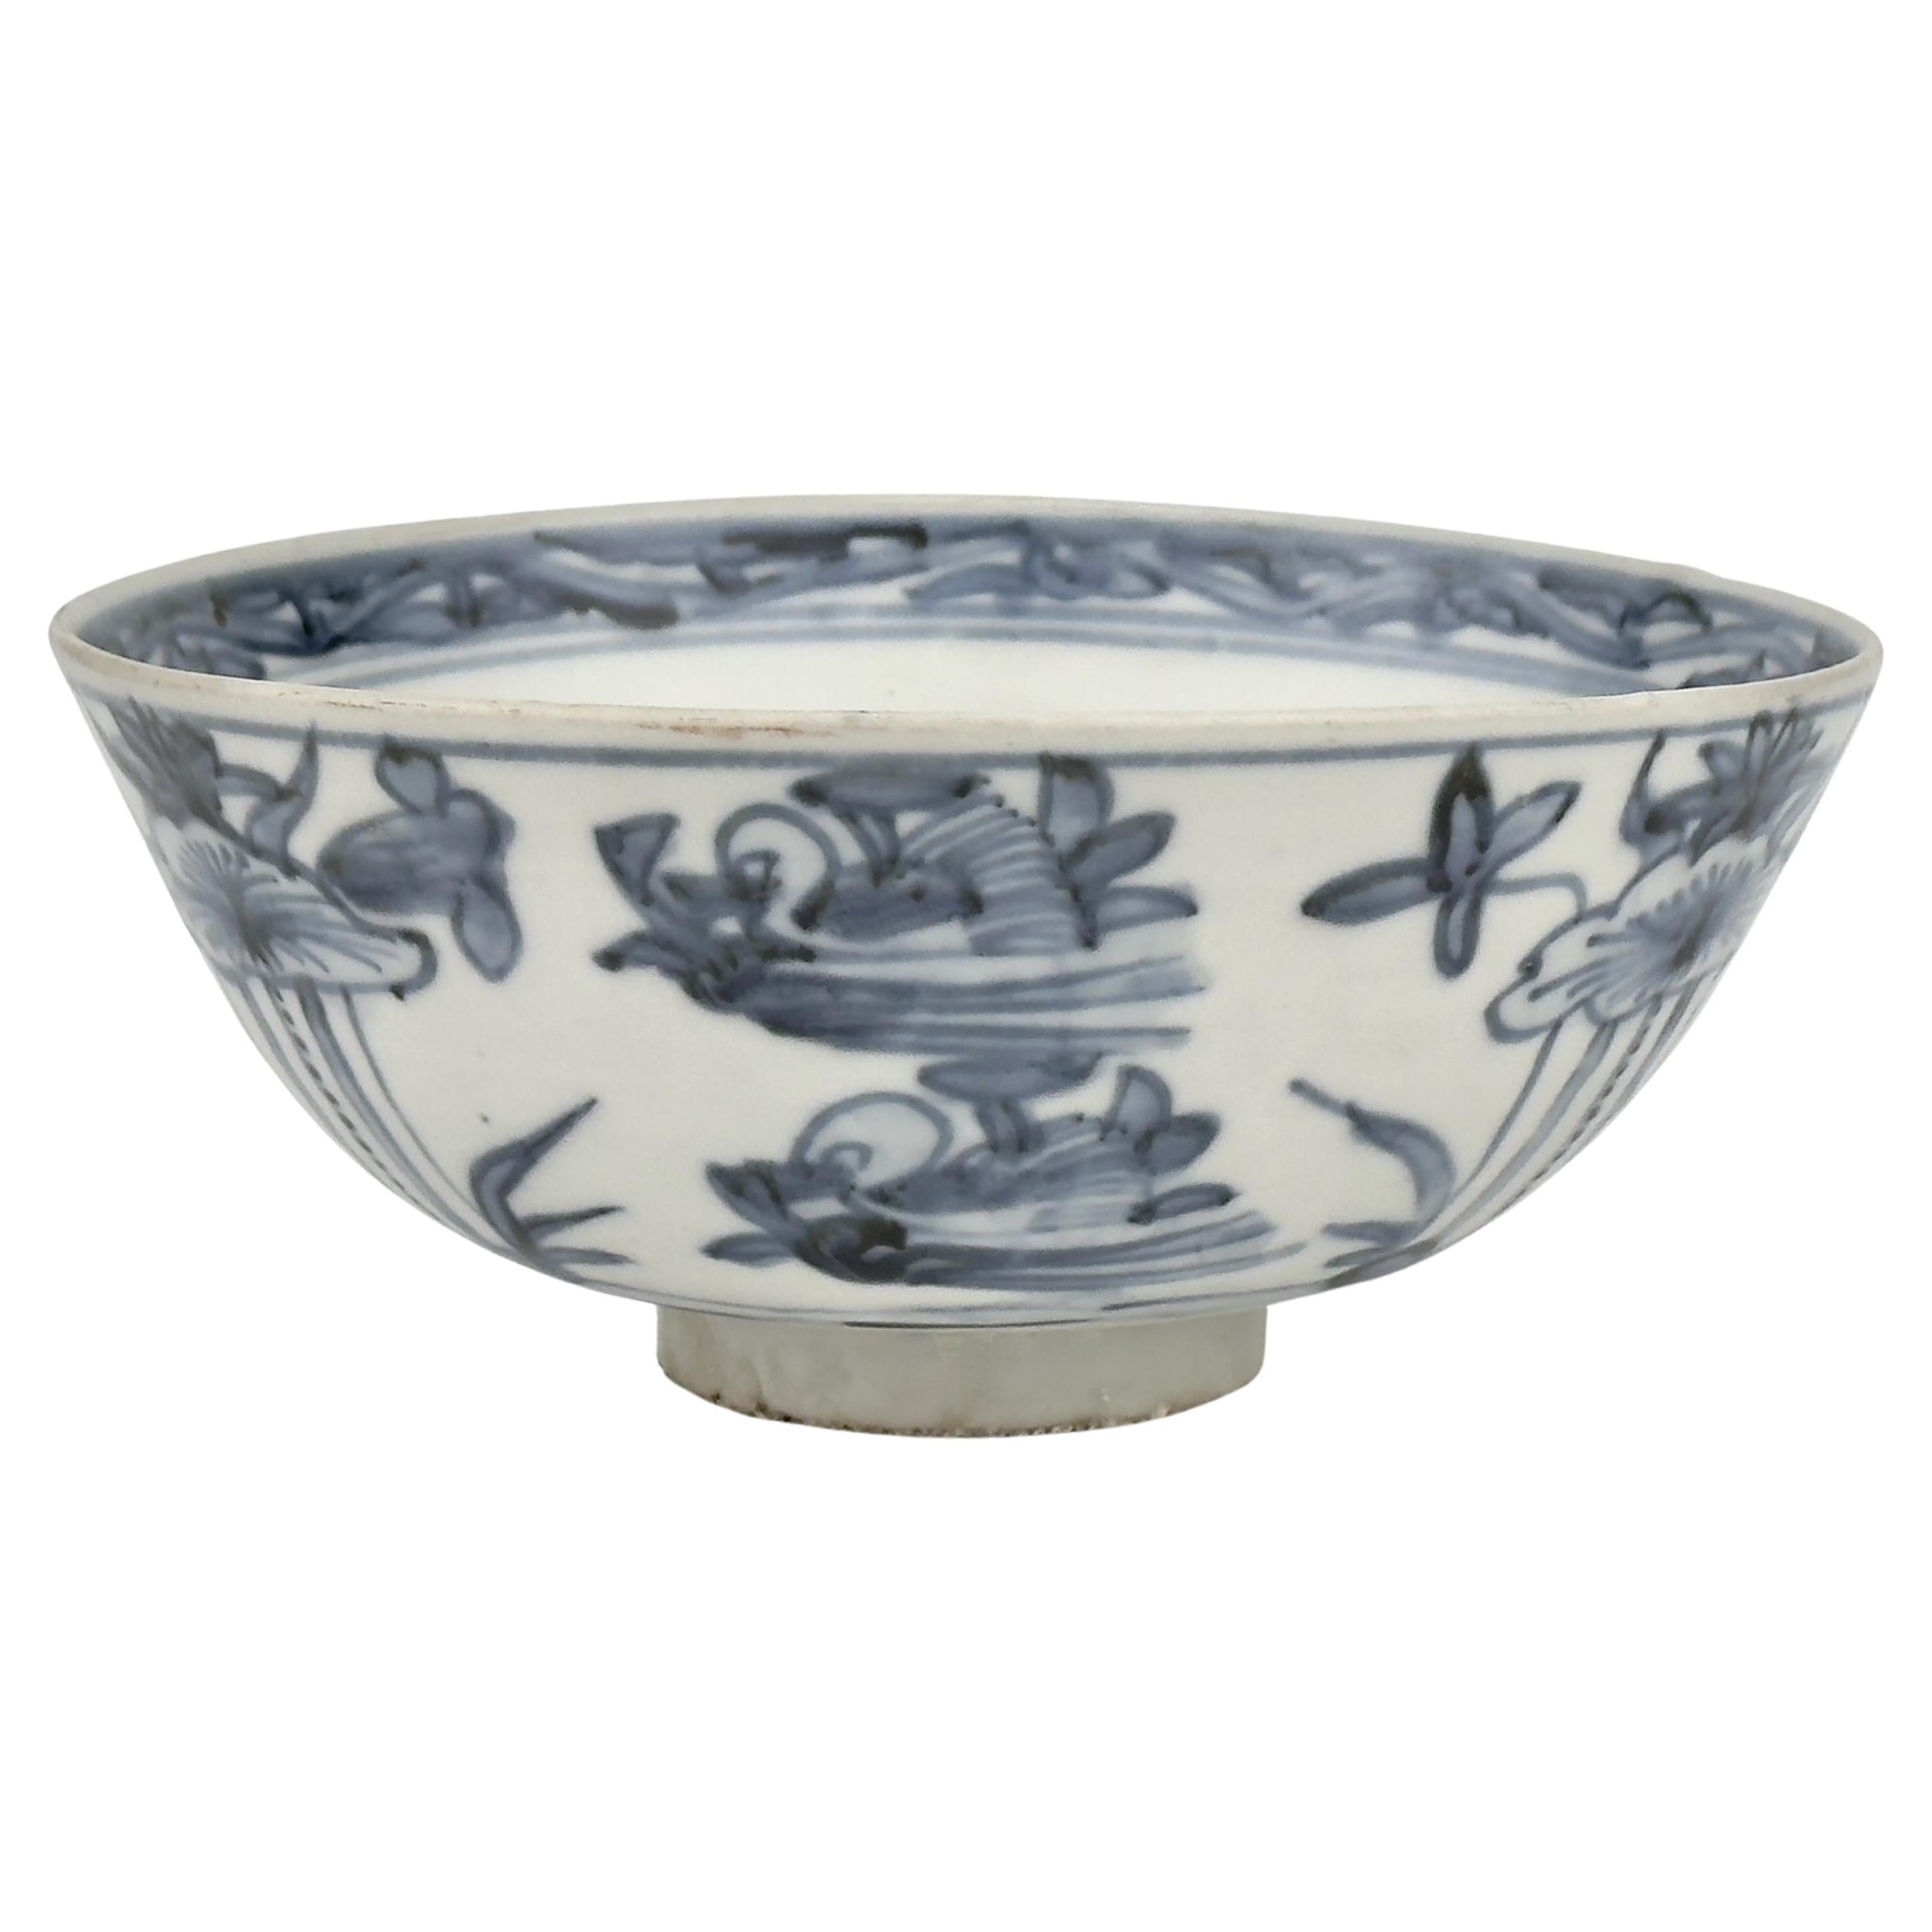 Bowl with mandarin duck and lotus pattern design, Late Ming Era(16-17th century) For Sale